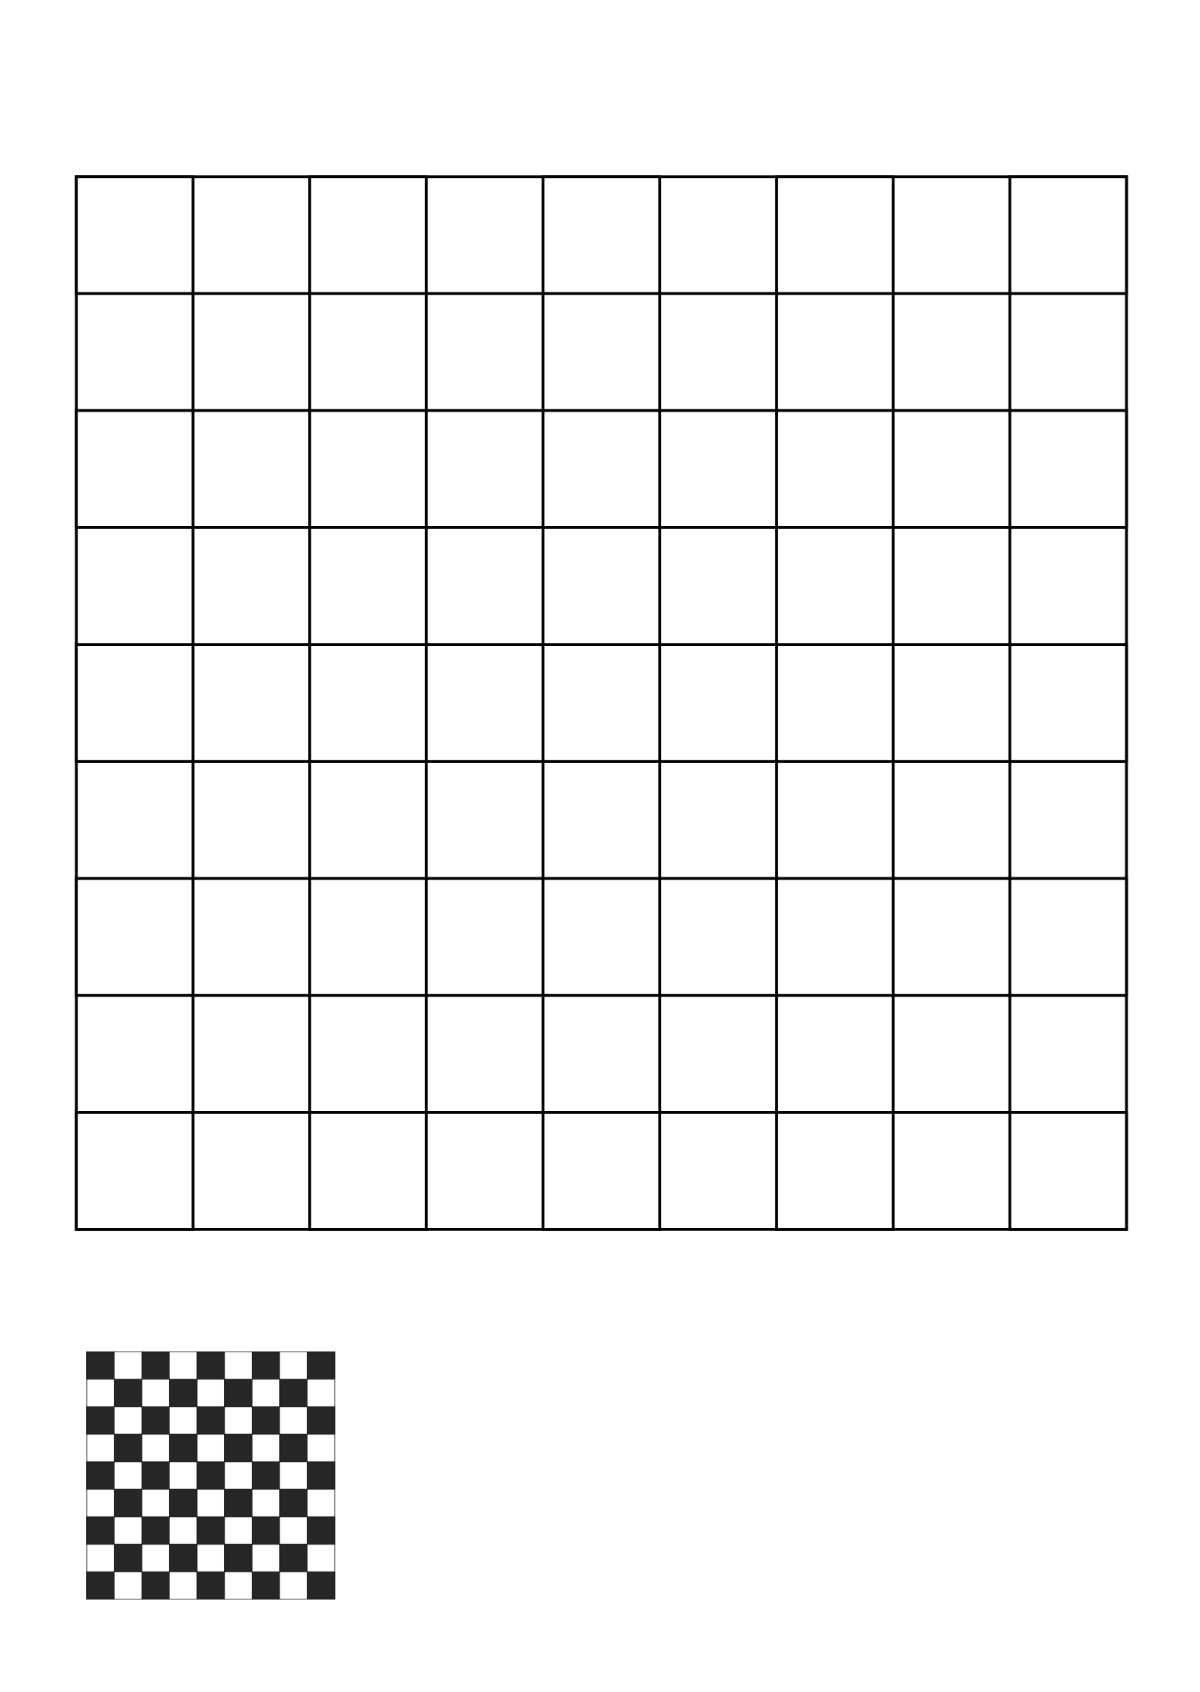 Checkered Flag Pattern coloring page Template